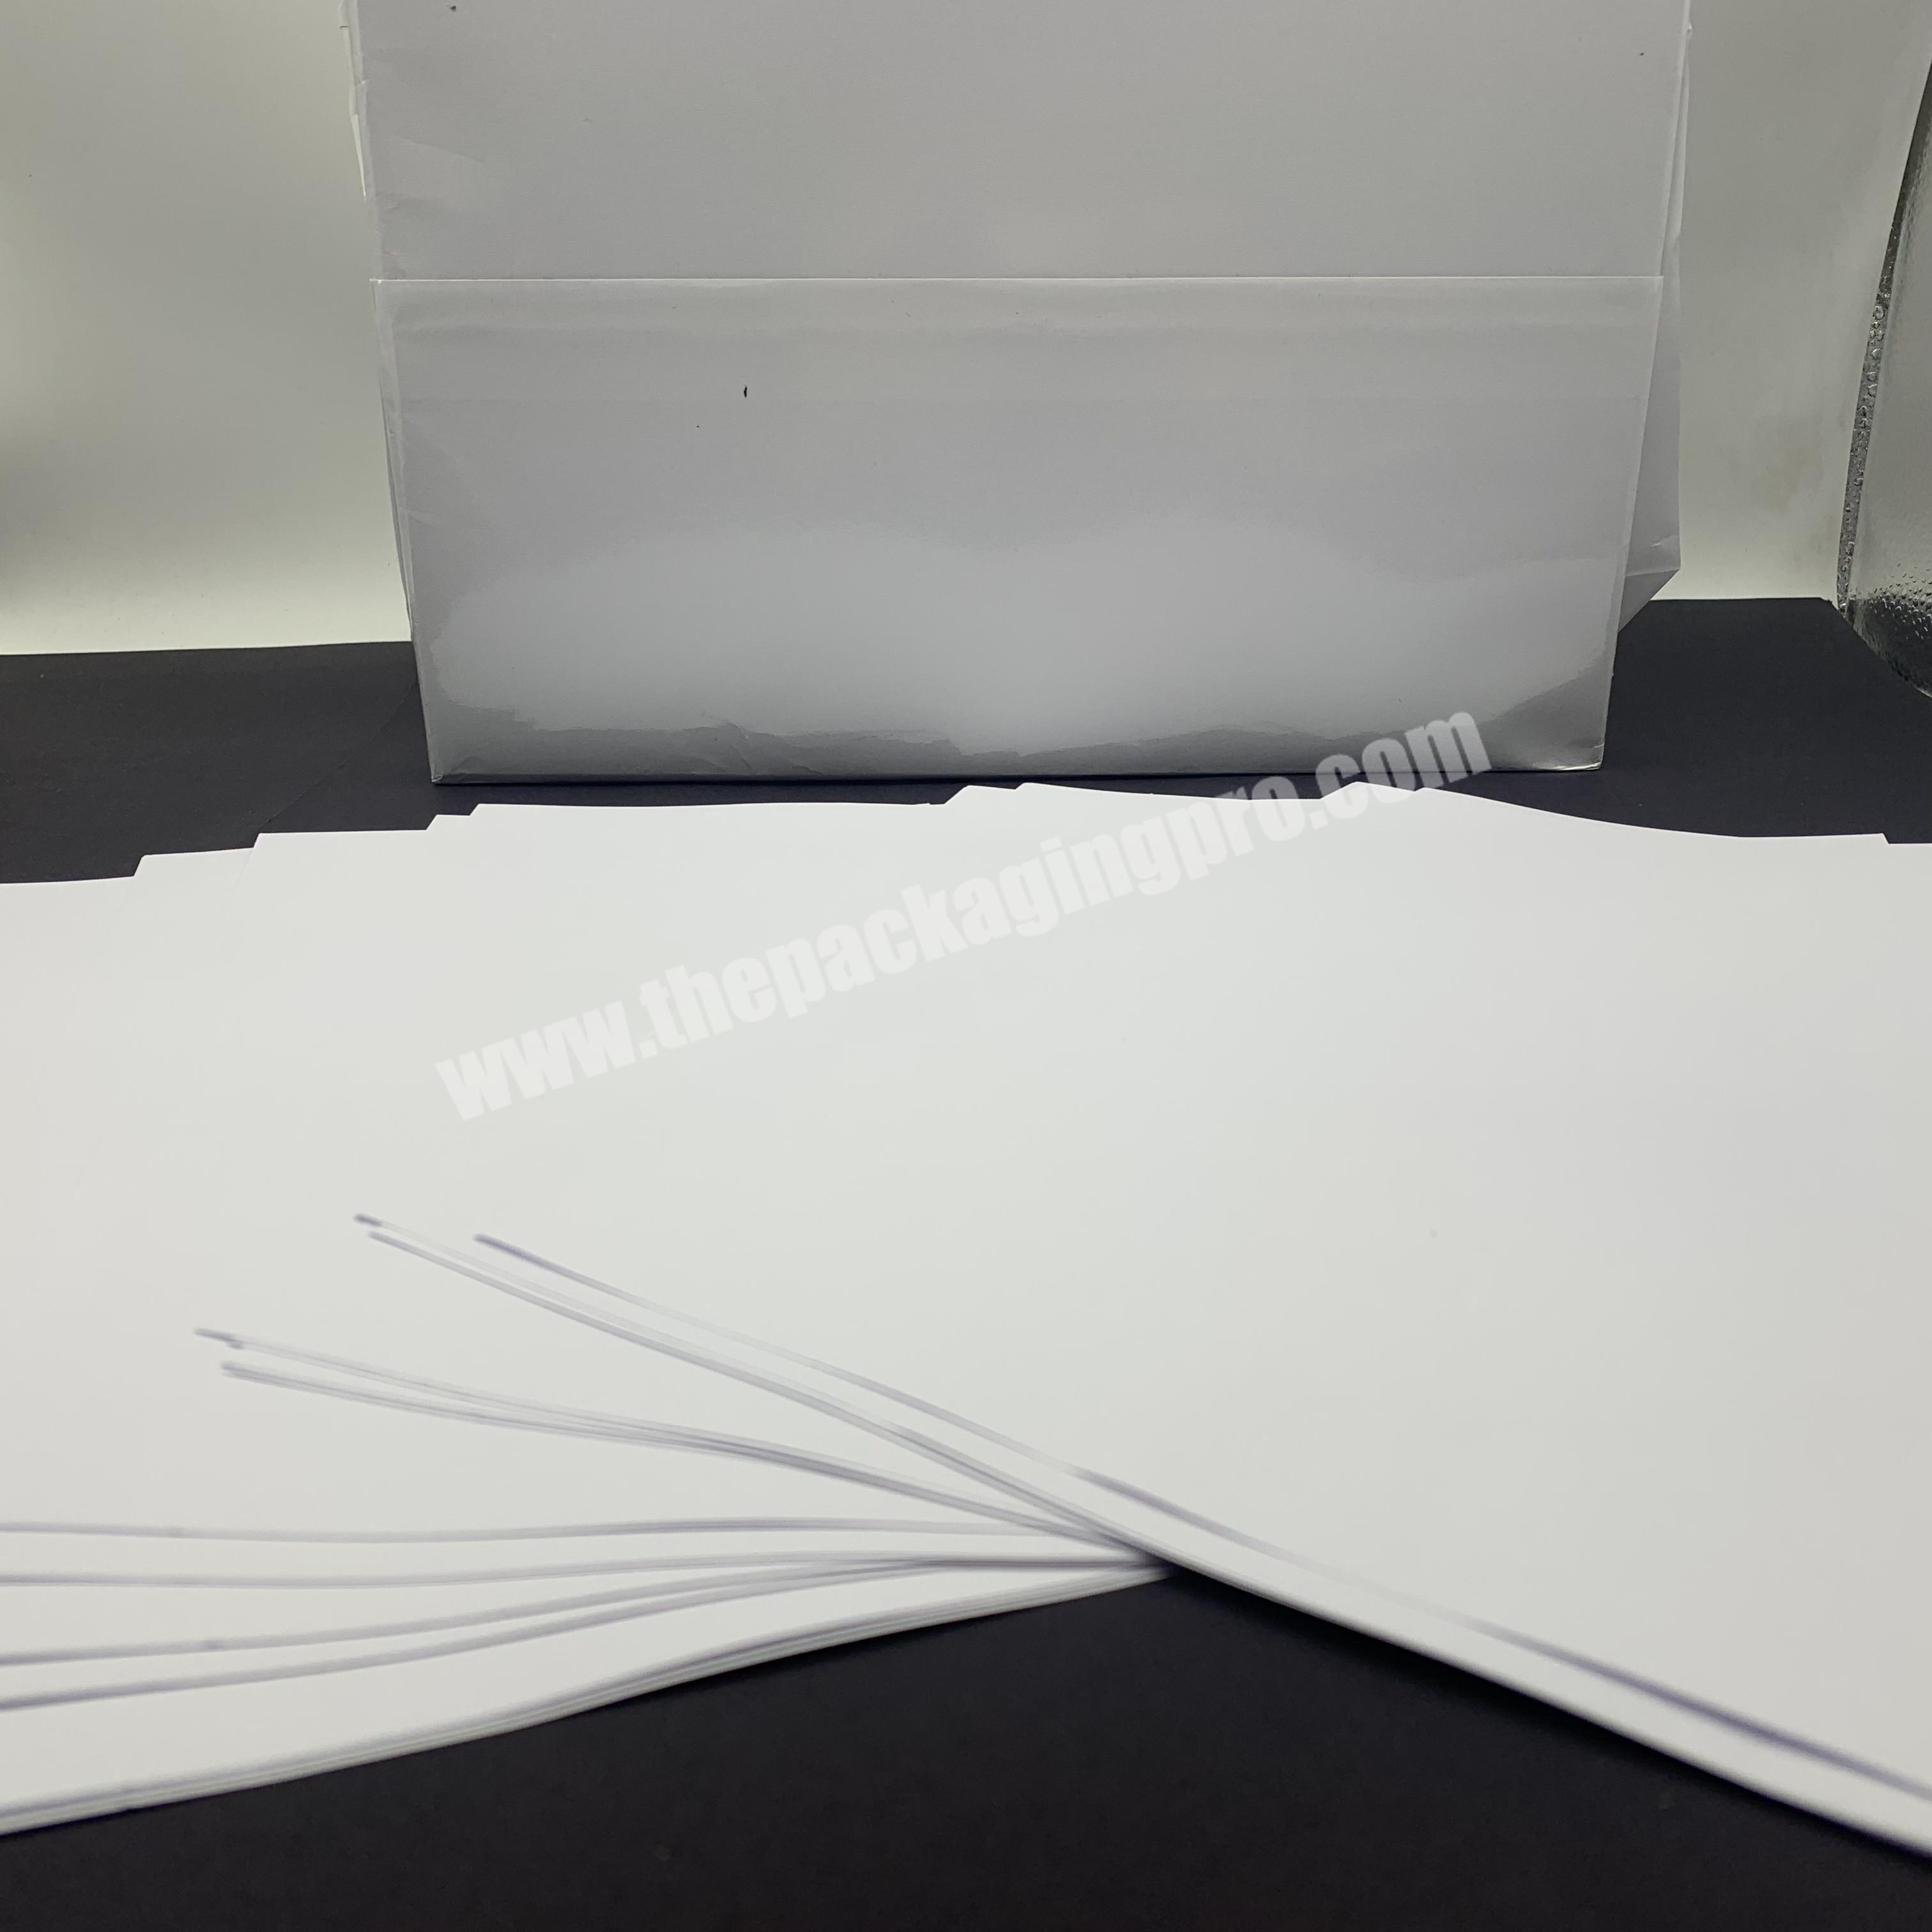 Wholesale Cheap A4 Printing Paper White 70gsm 500 Sheetspack A4 Copy Paper